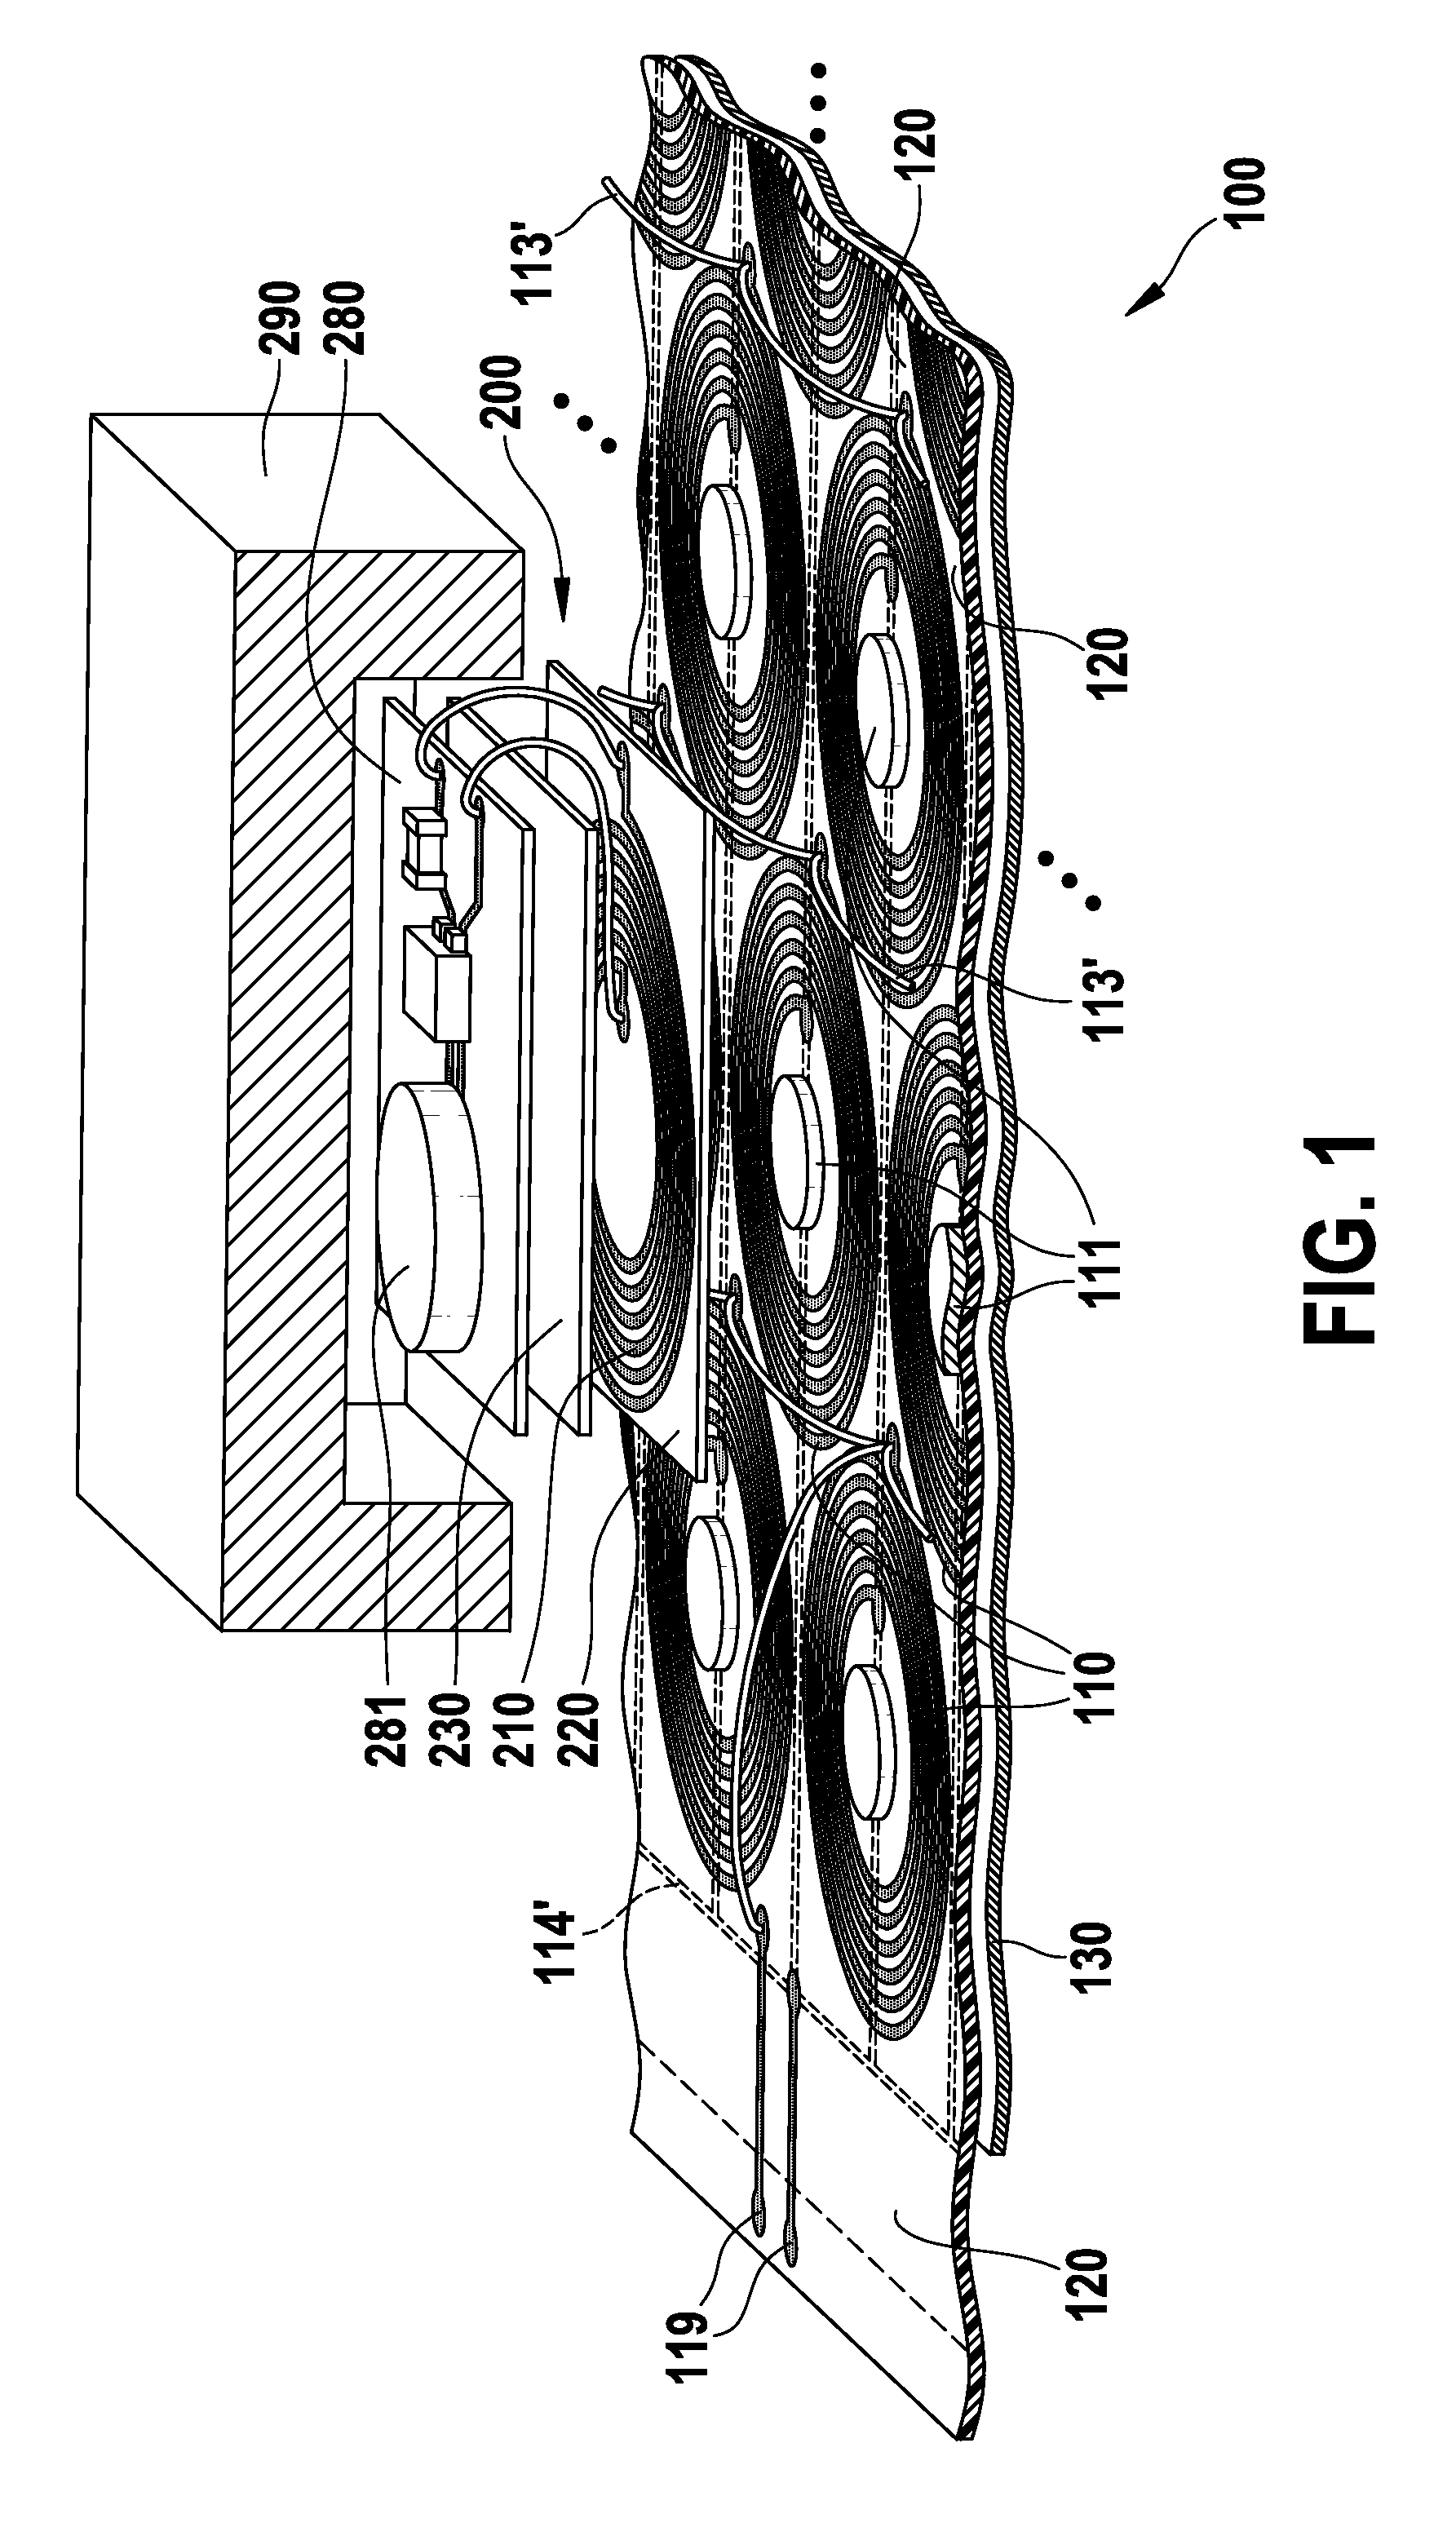 Floor covering and inductive power system